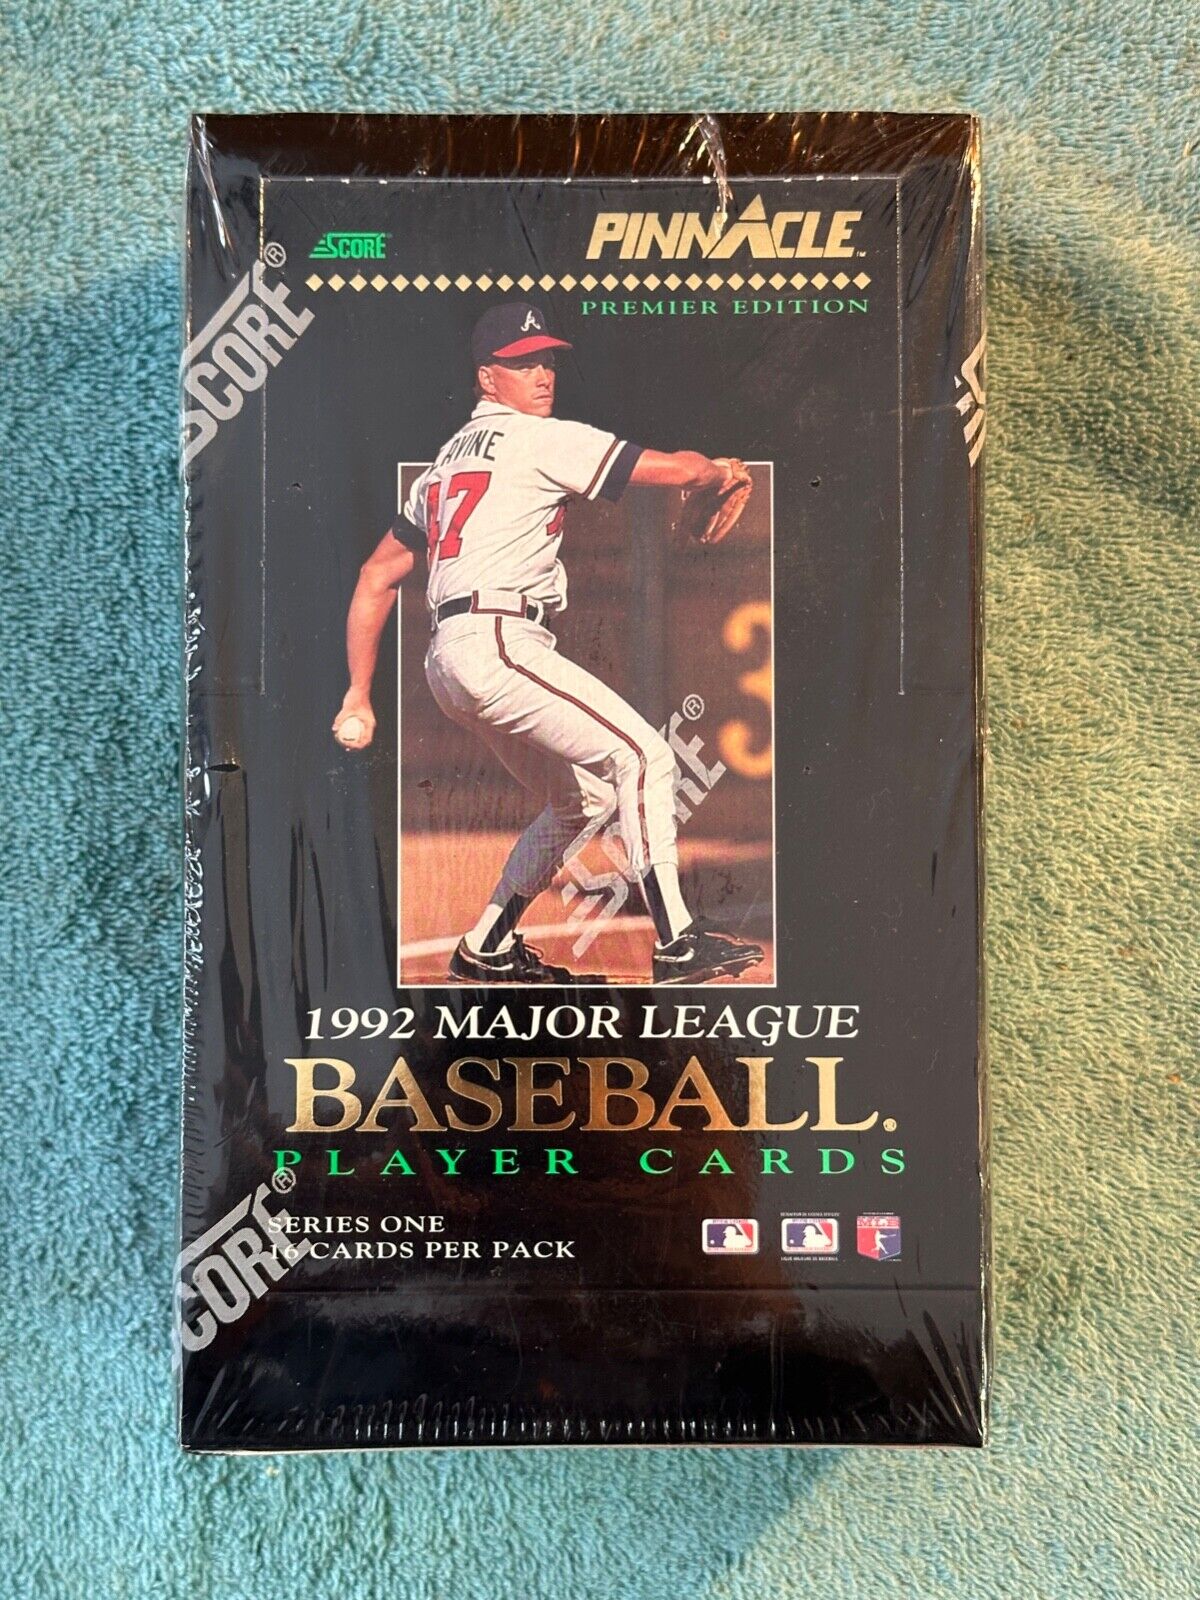 Pinnacle 1992 MLB Player Cards Series One Premier Edition 16 Cards Per Pack TG47